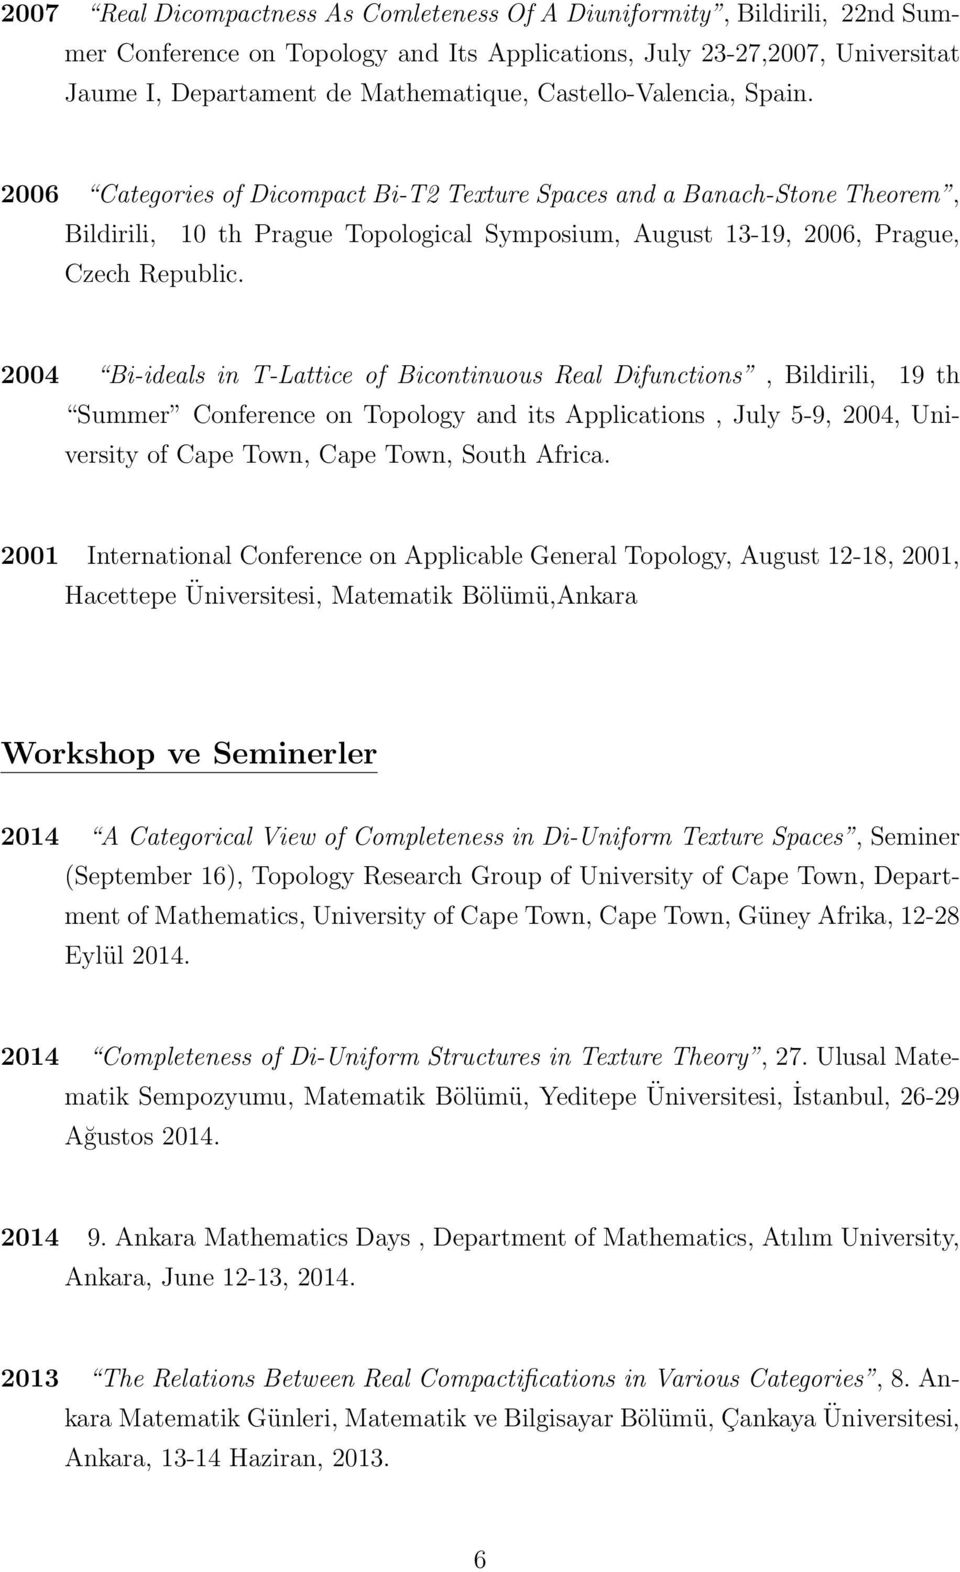 2004 Bi-ideals in T-Lattice of Bicontinuous Real Difunctions, Bildirili, 19 th Summer Conference on Topology and its Applications, July 5-9, 2004, University of Cape Town, Cape Town, South Africa.